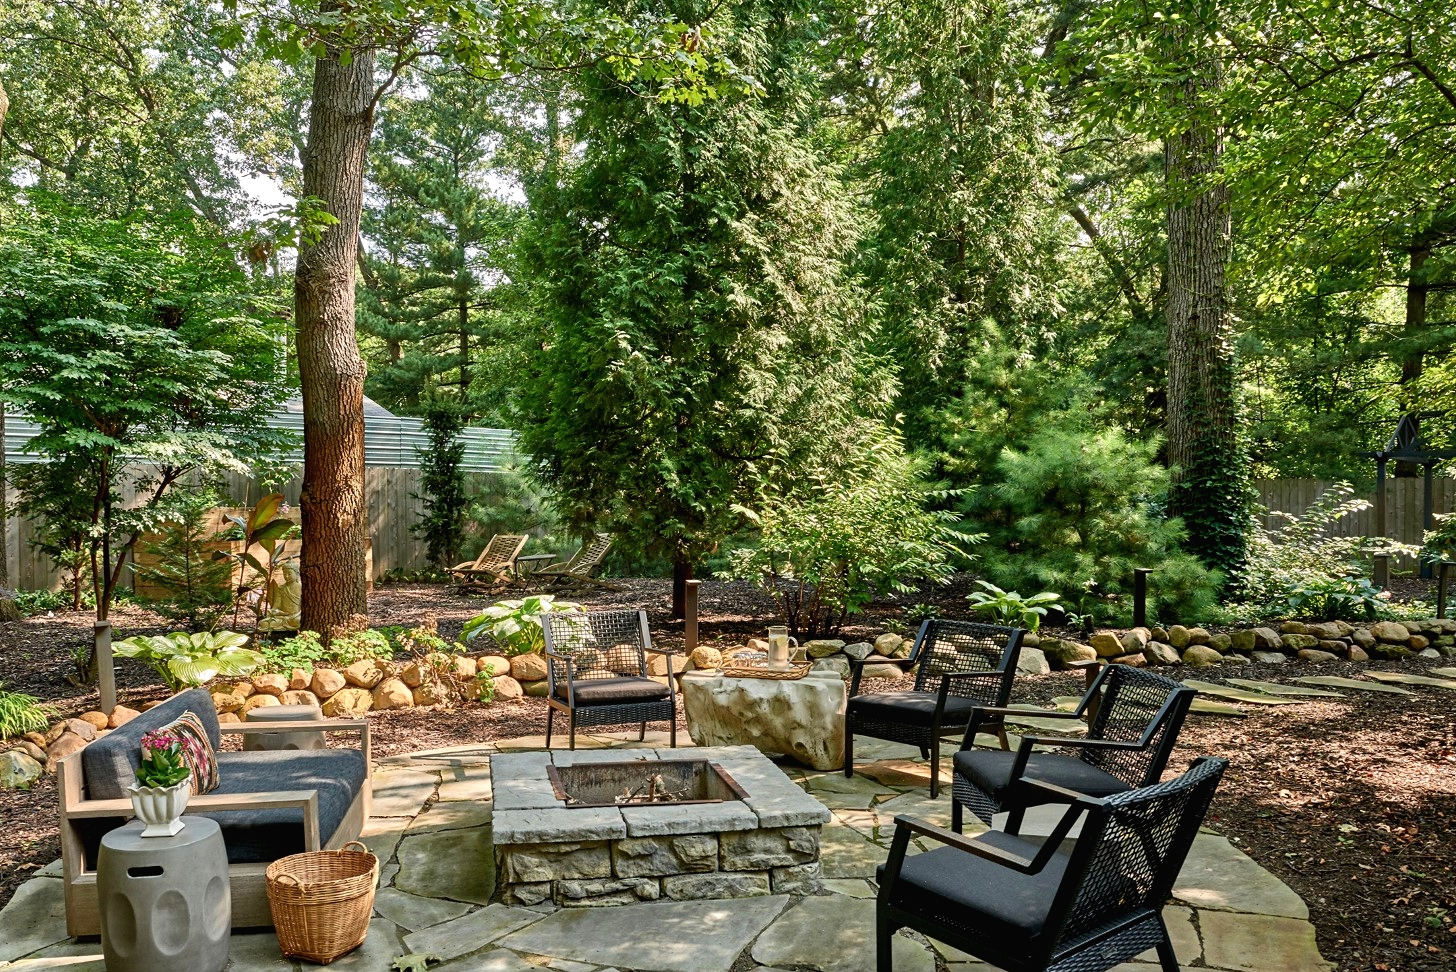 17 Beautiful Rustic Patio Designs That Will Take Lift Up Your Outdoor Lifestyle